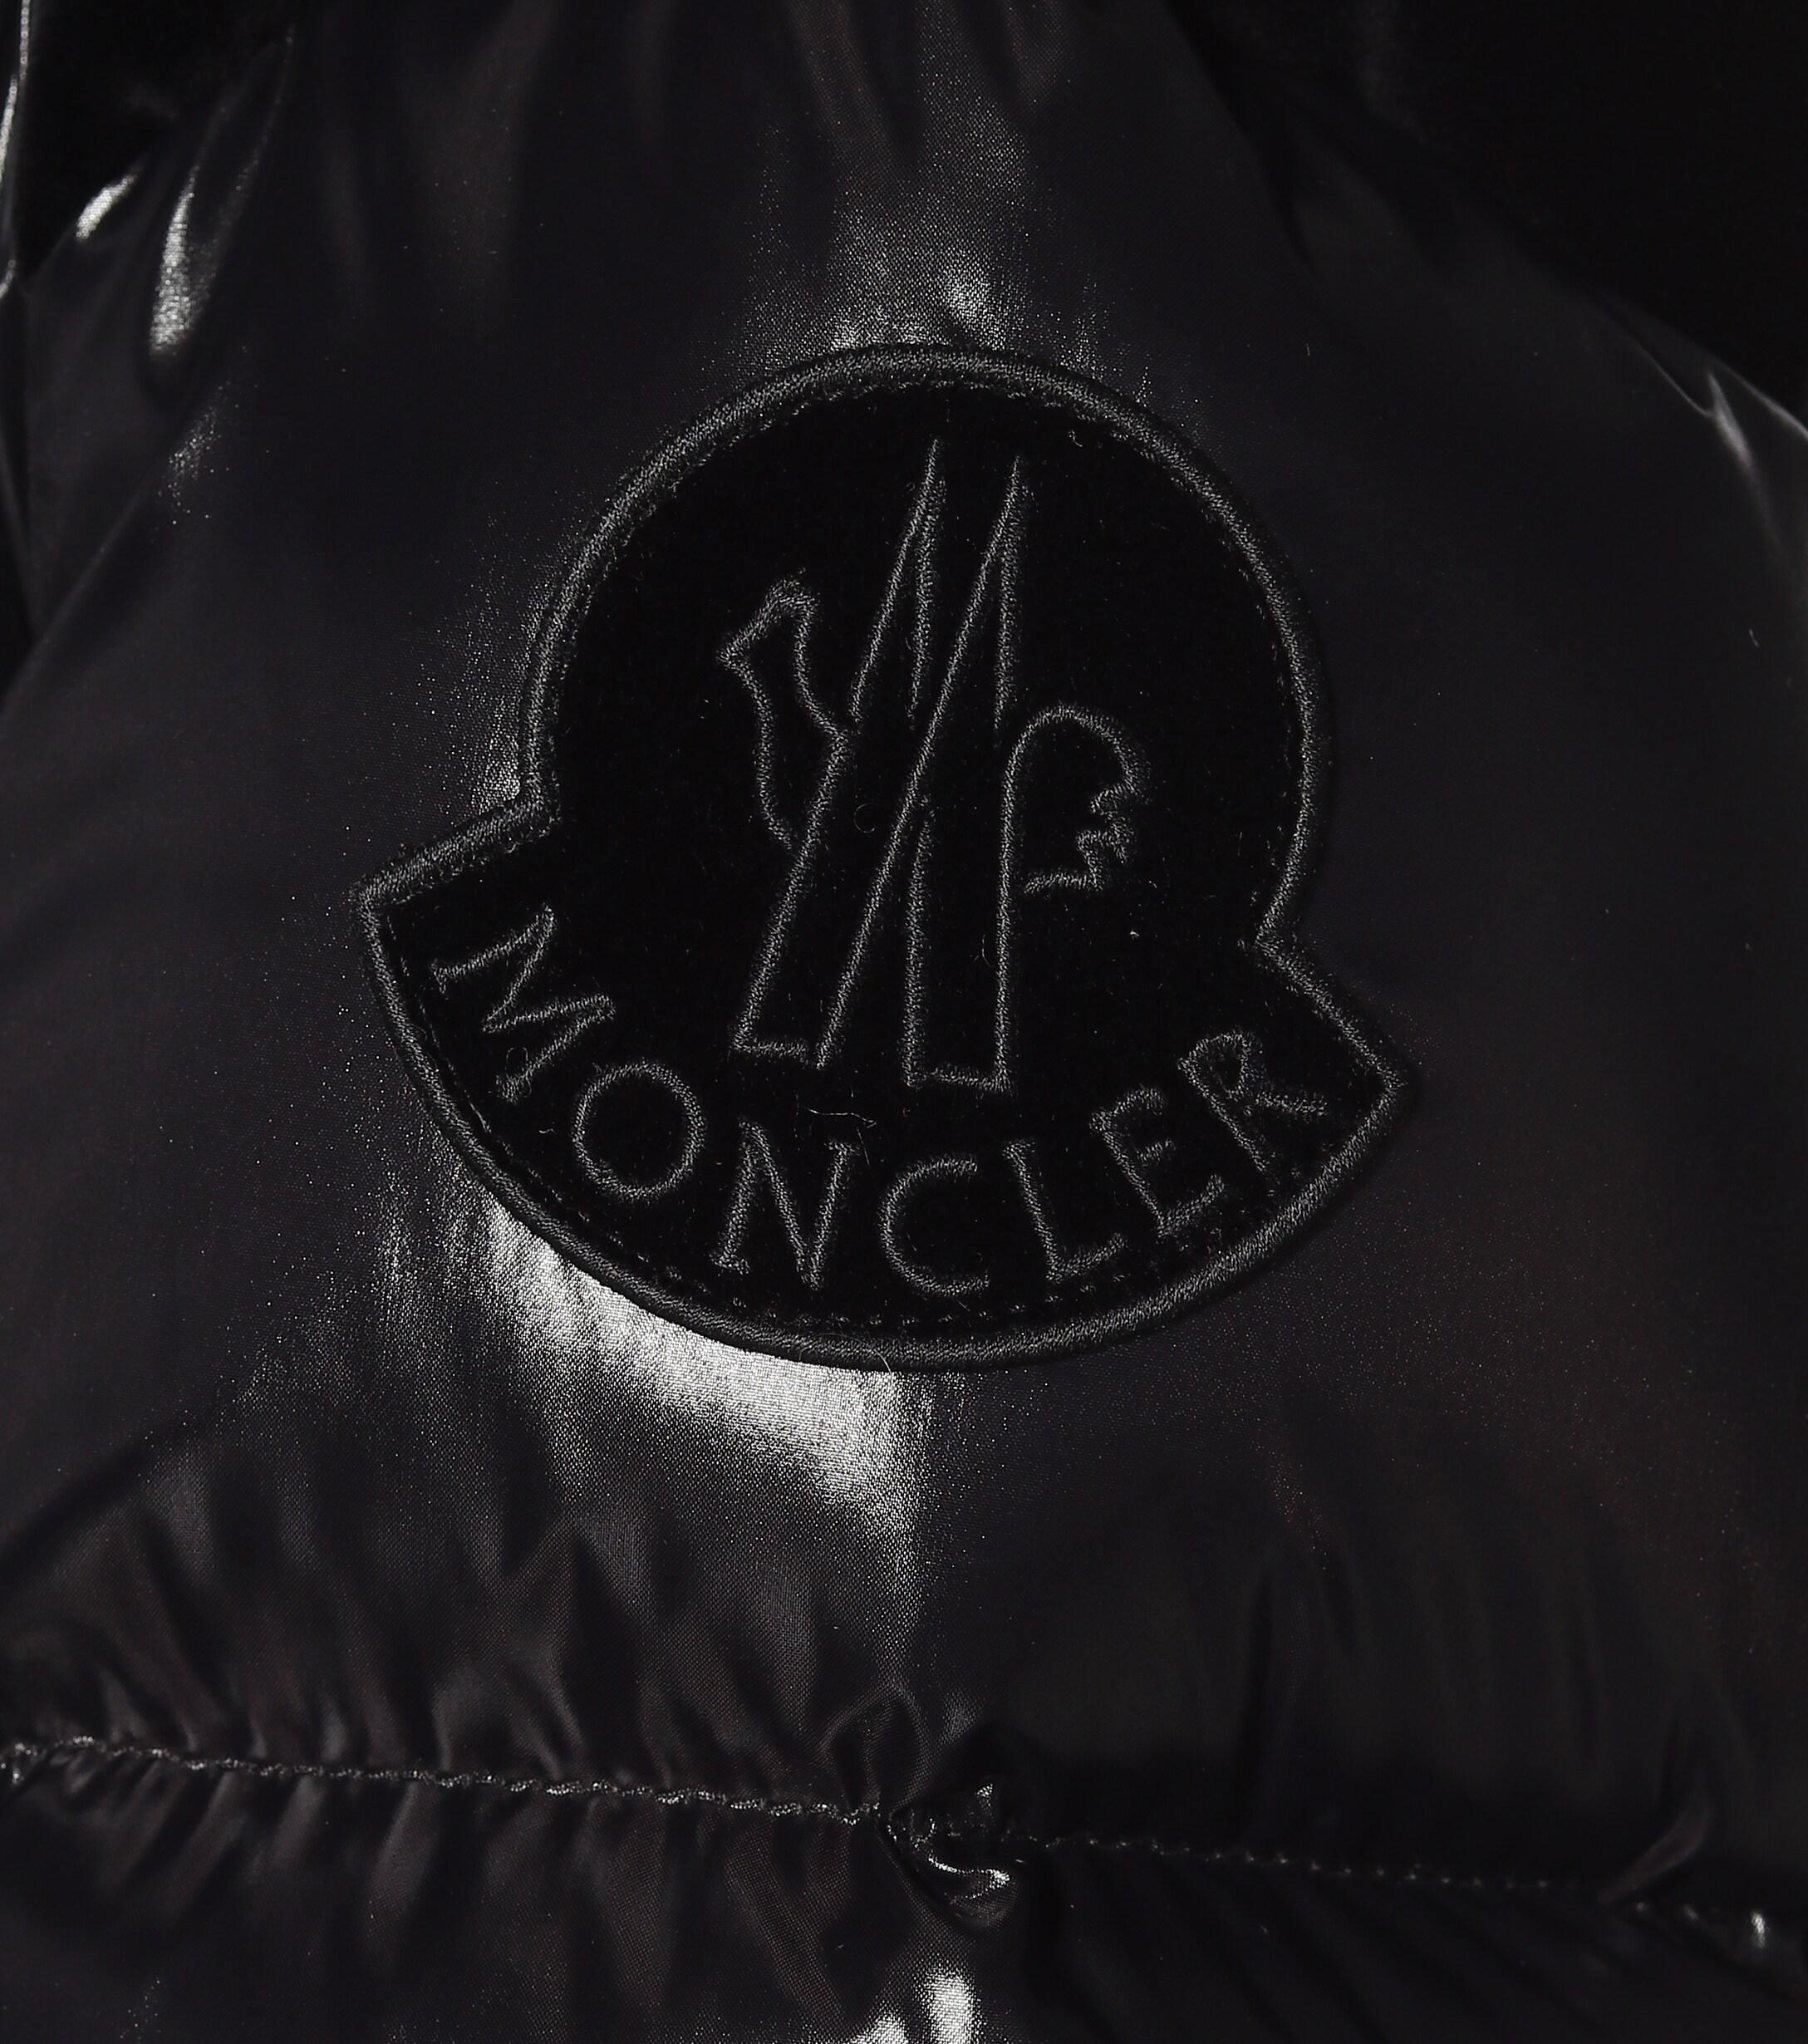 Moncler Synthetic Chouelle Down Jacket in Black - Lyst